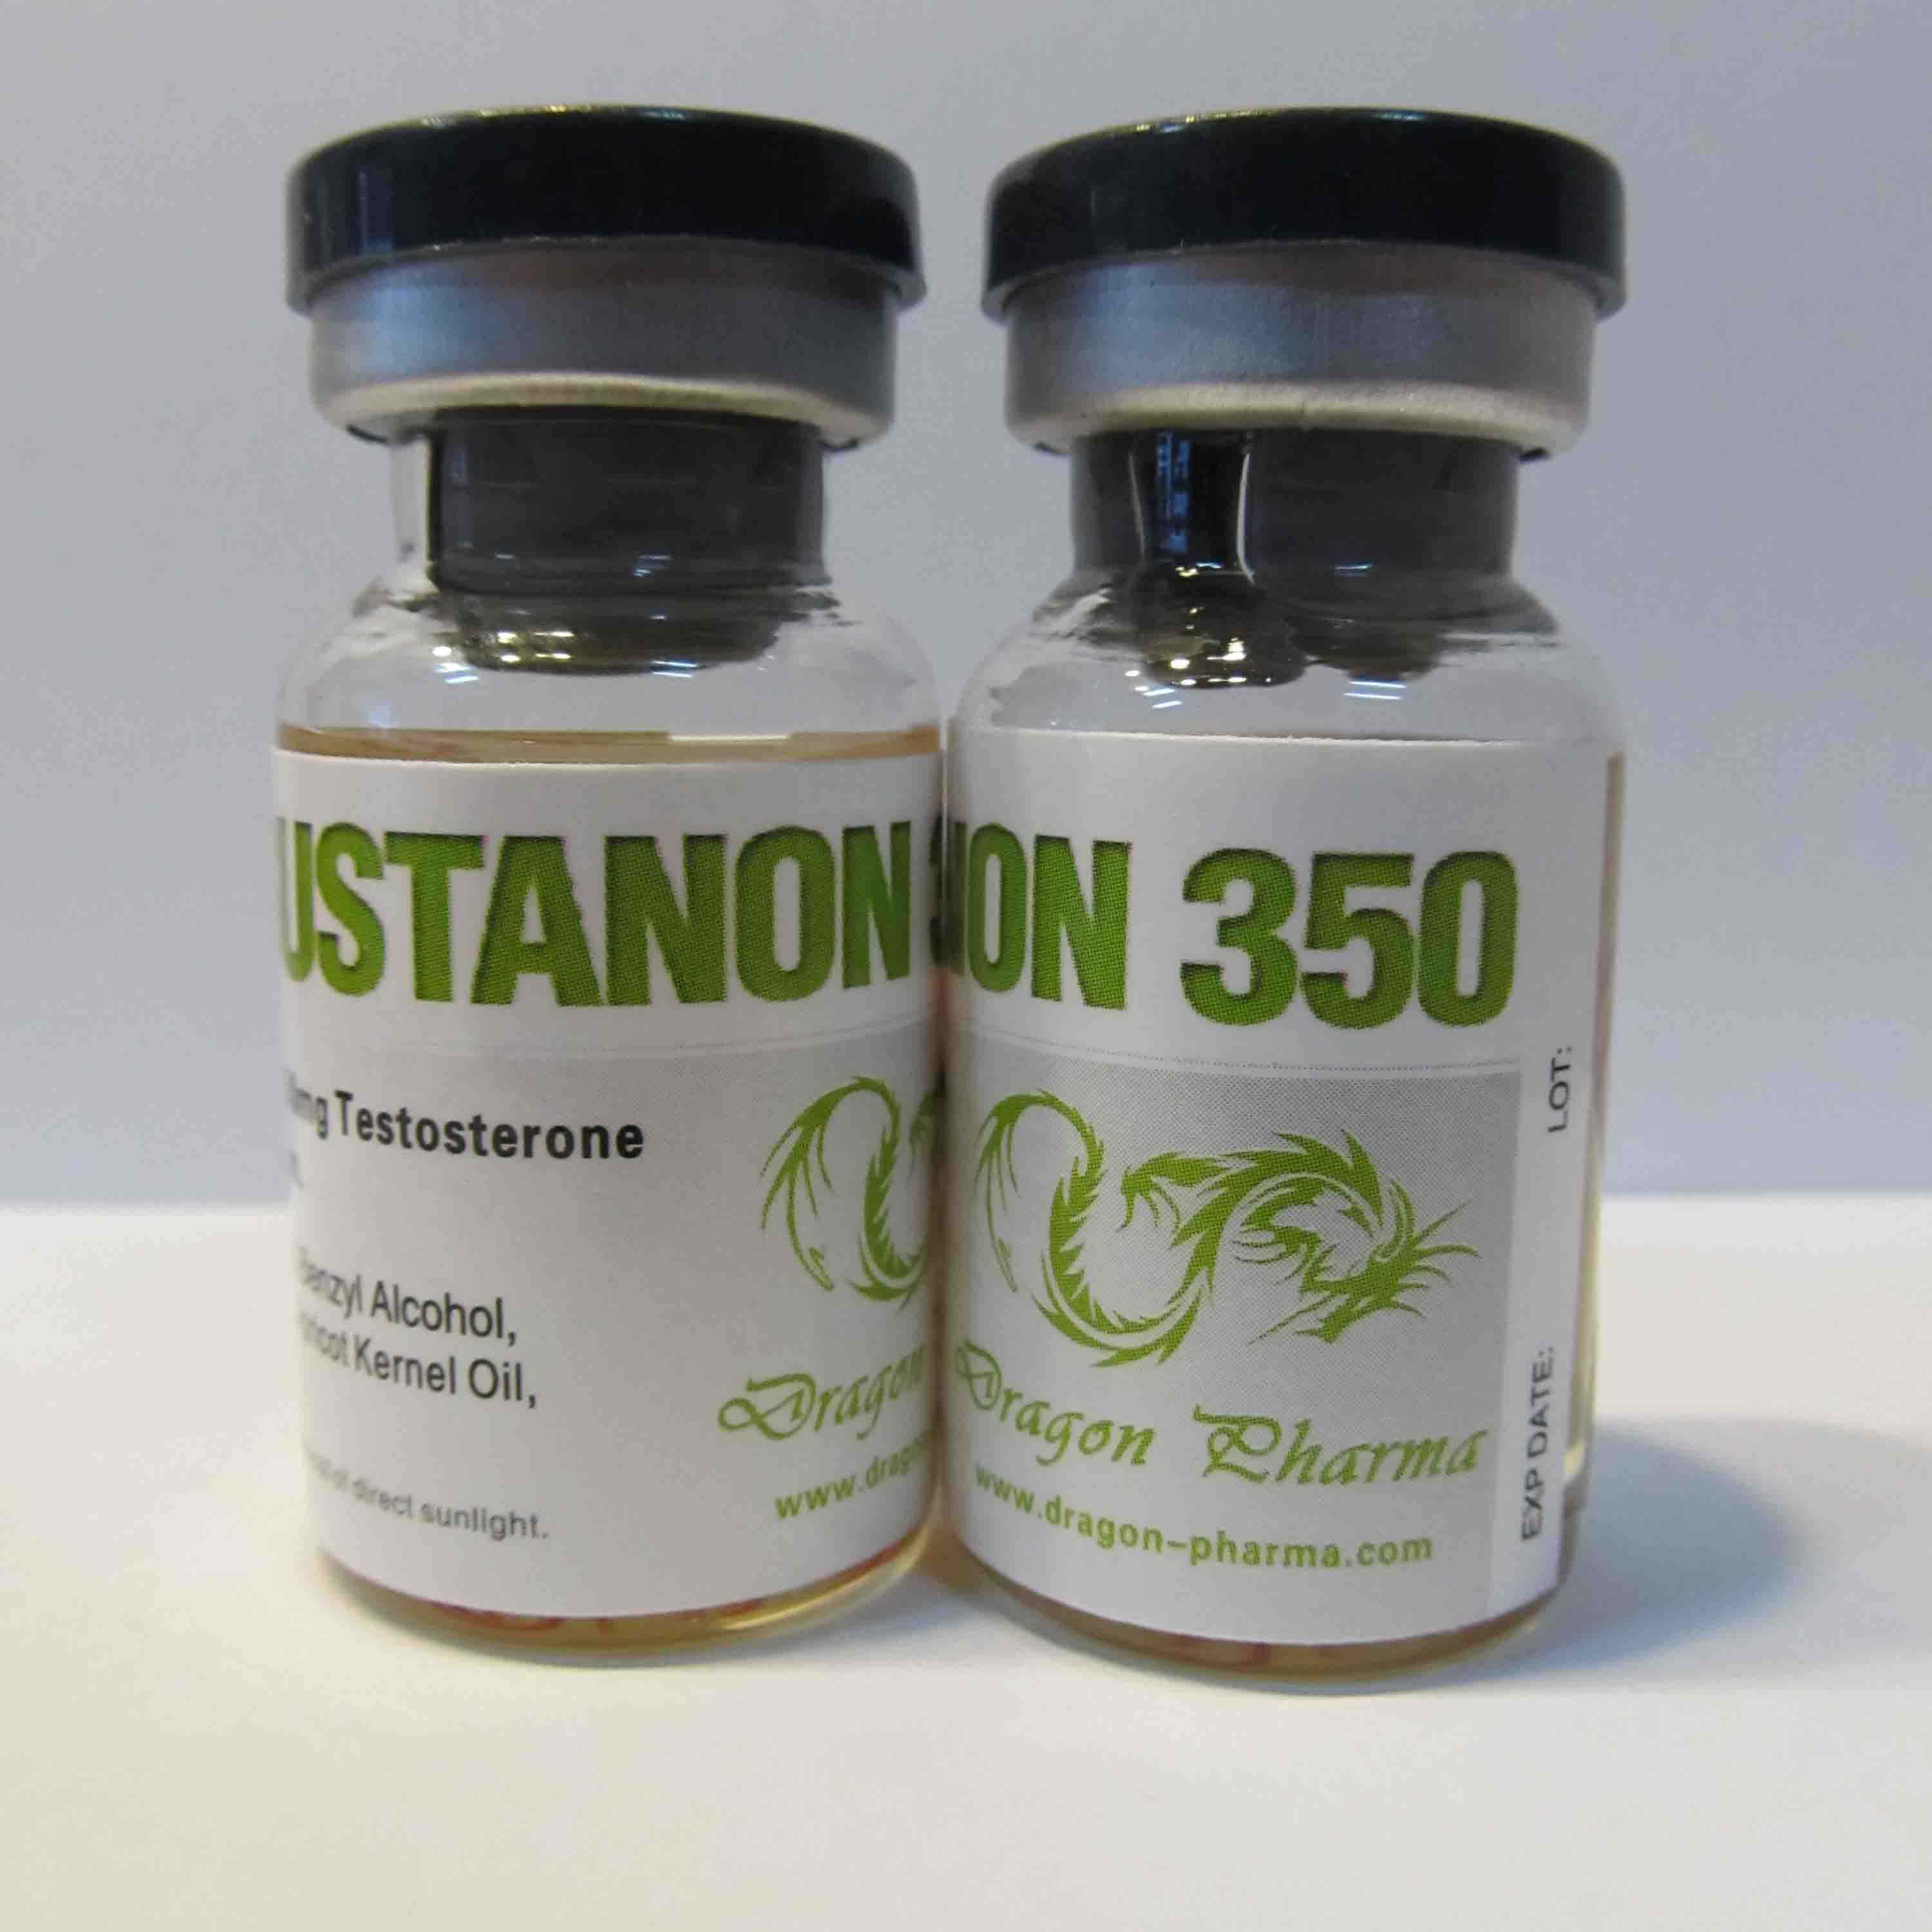 Sustanon: The Awesome Testosterone Combination